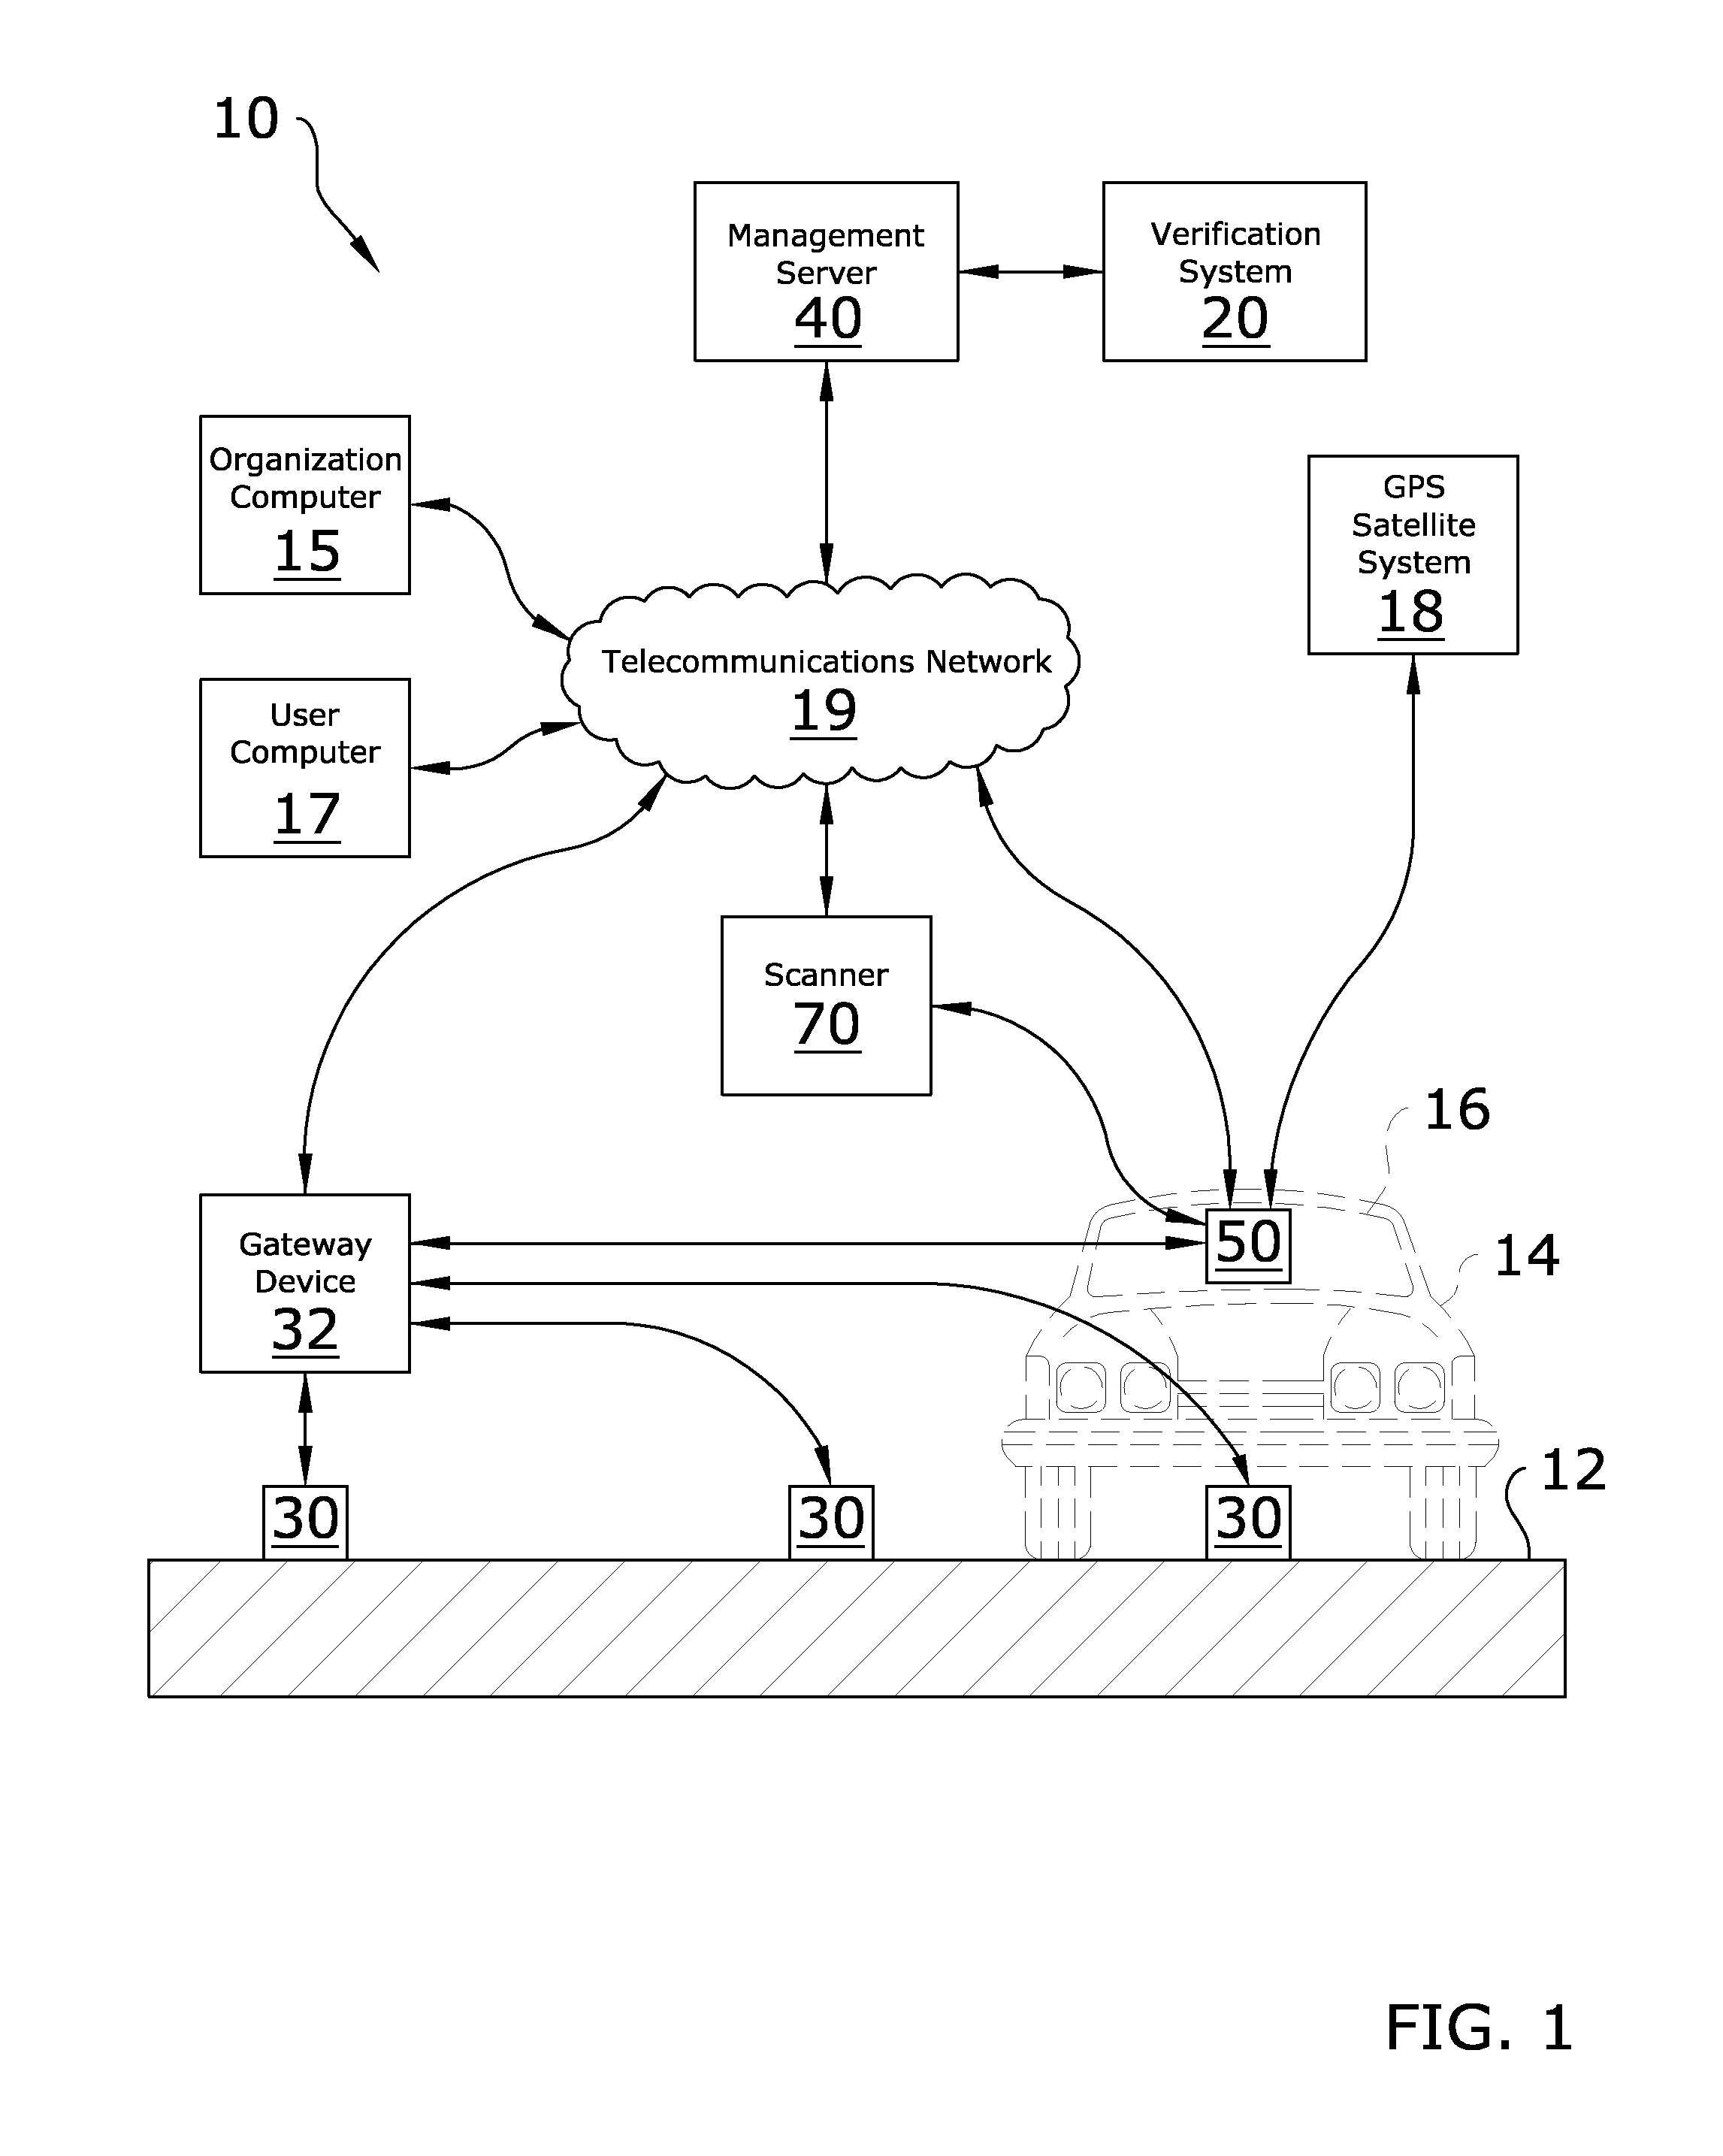 Location-Based Vehicle Parking System